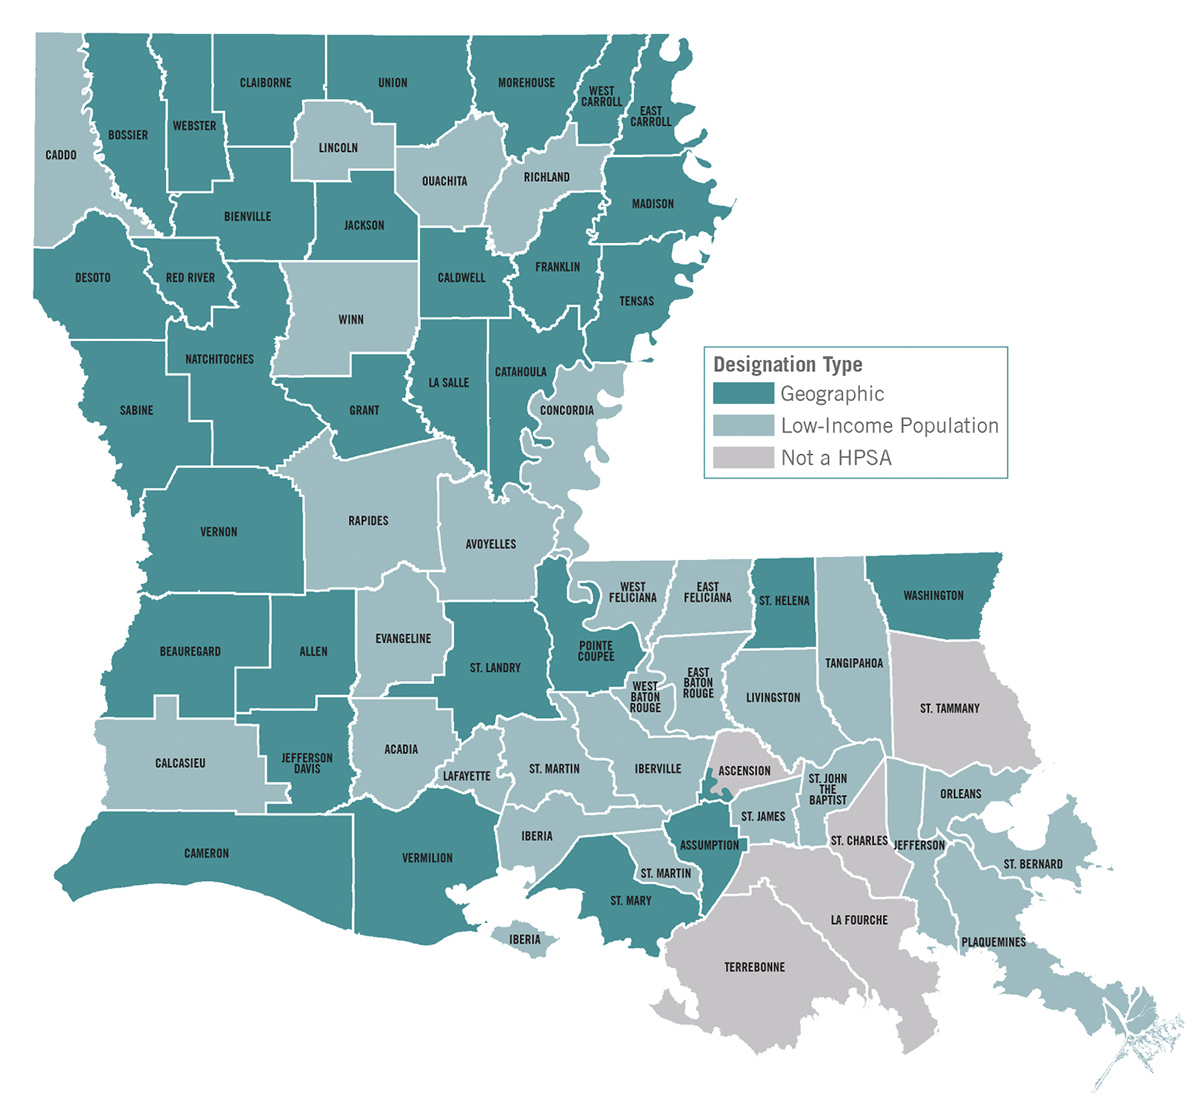 Map of high-need areas for dental care in Louisiana